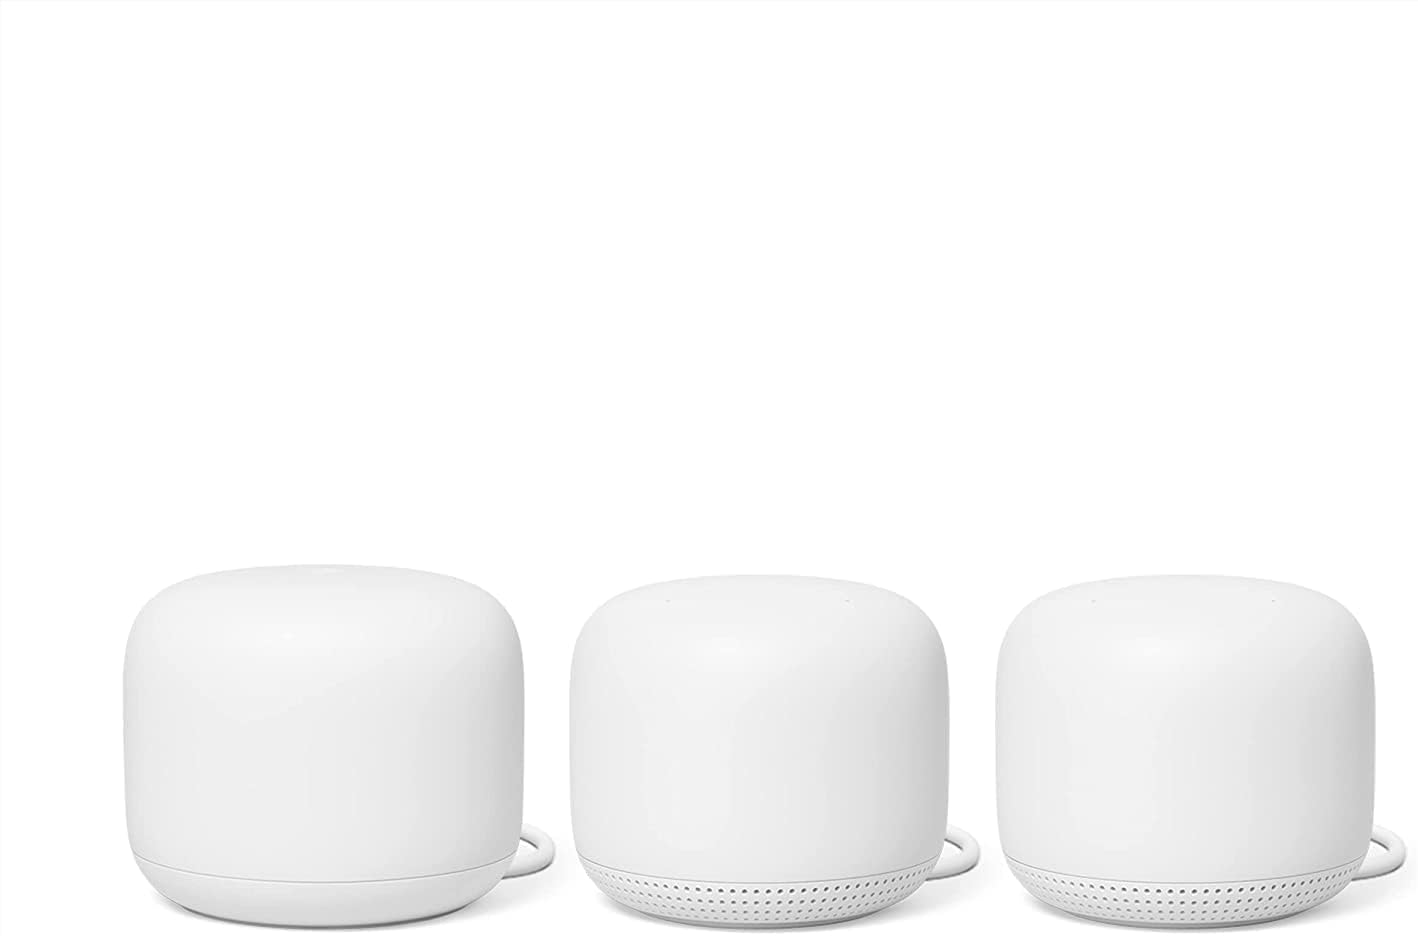 Google Nest WiFi Router 4-Pack (One Router & Three Extenders)